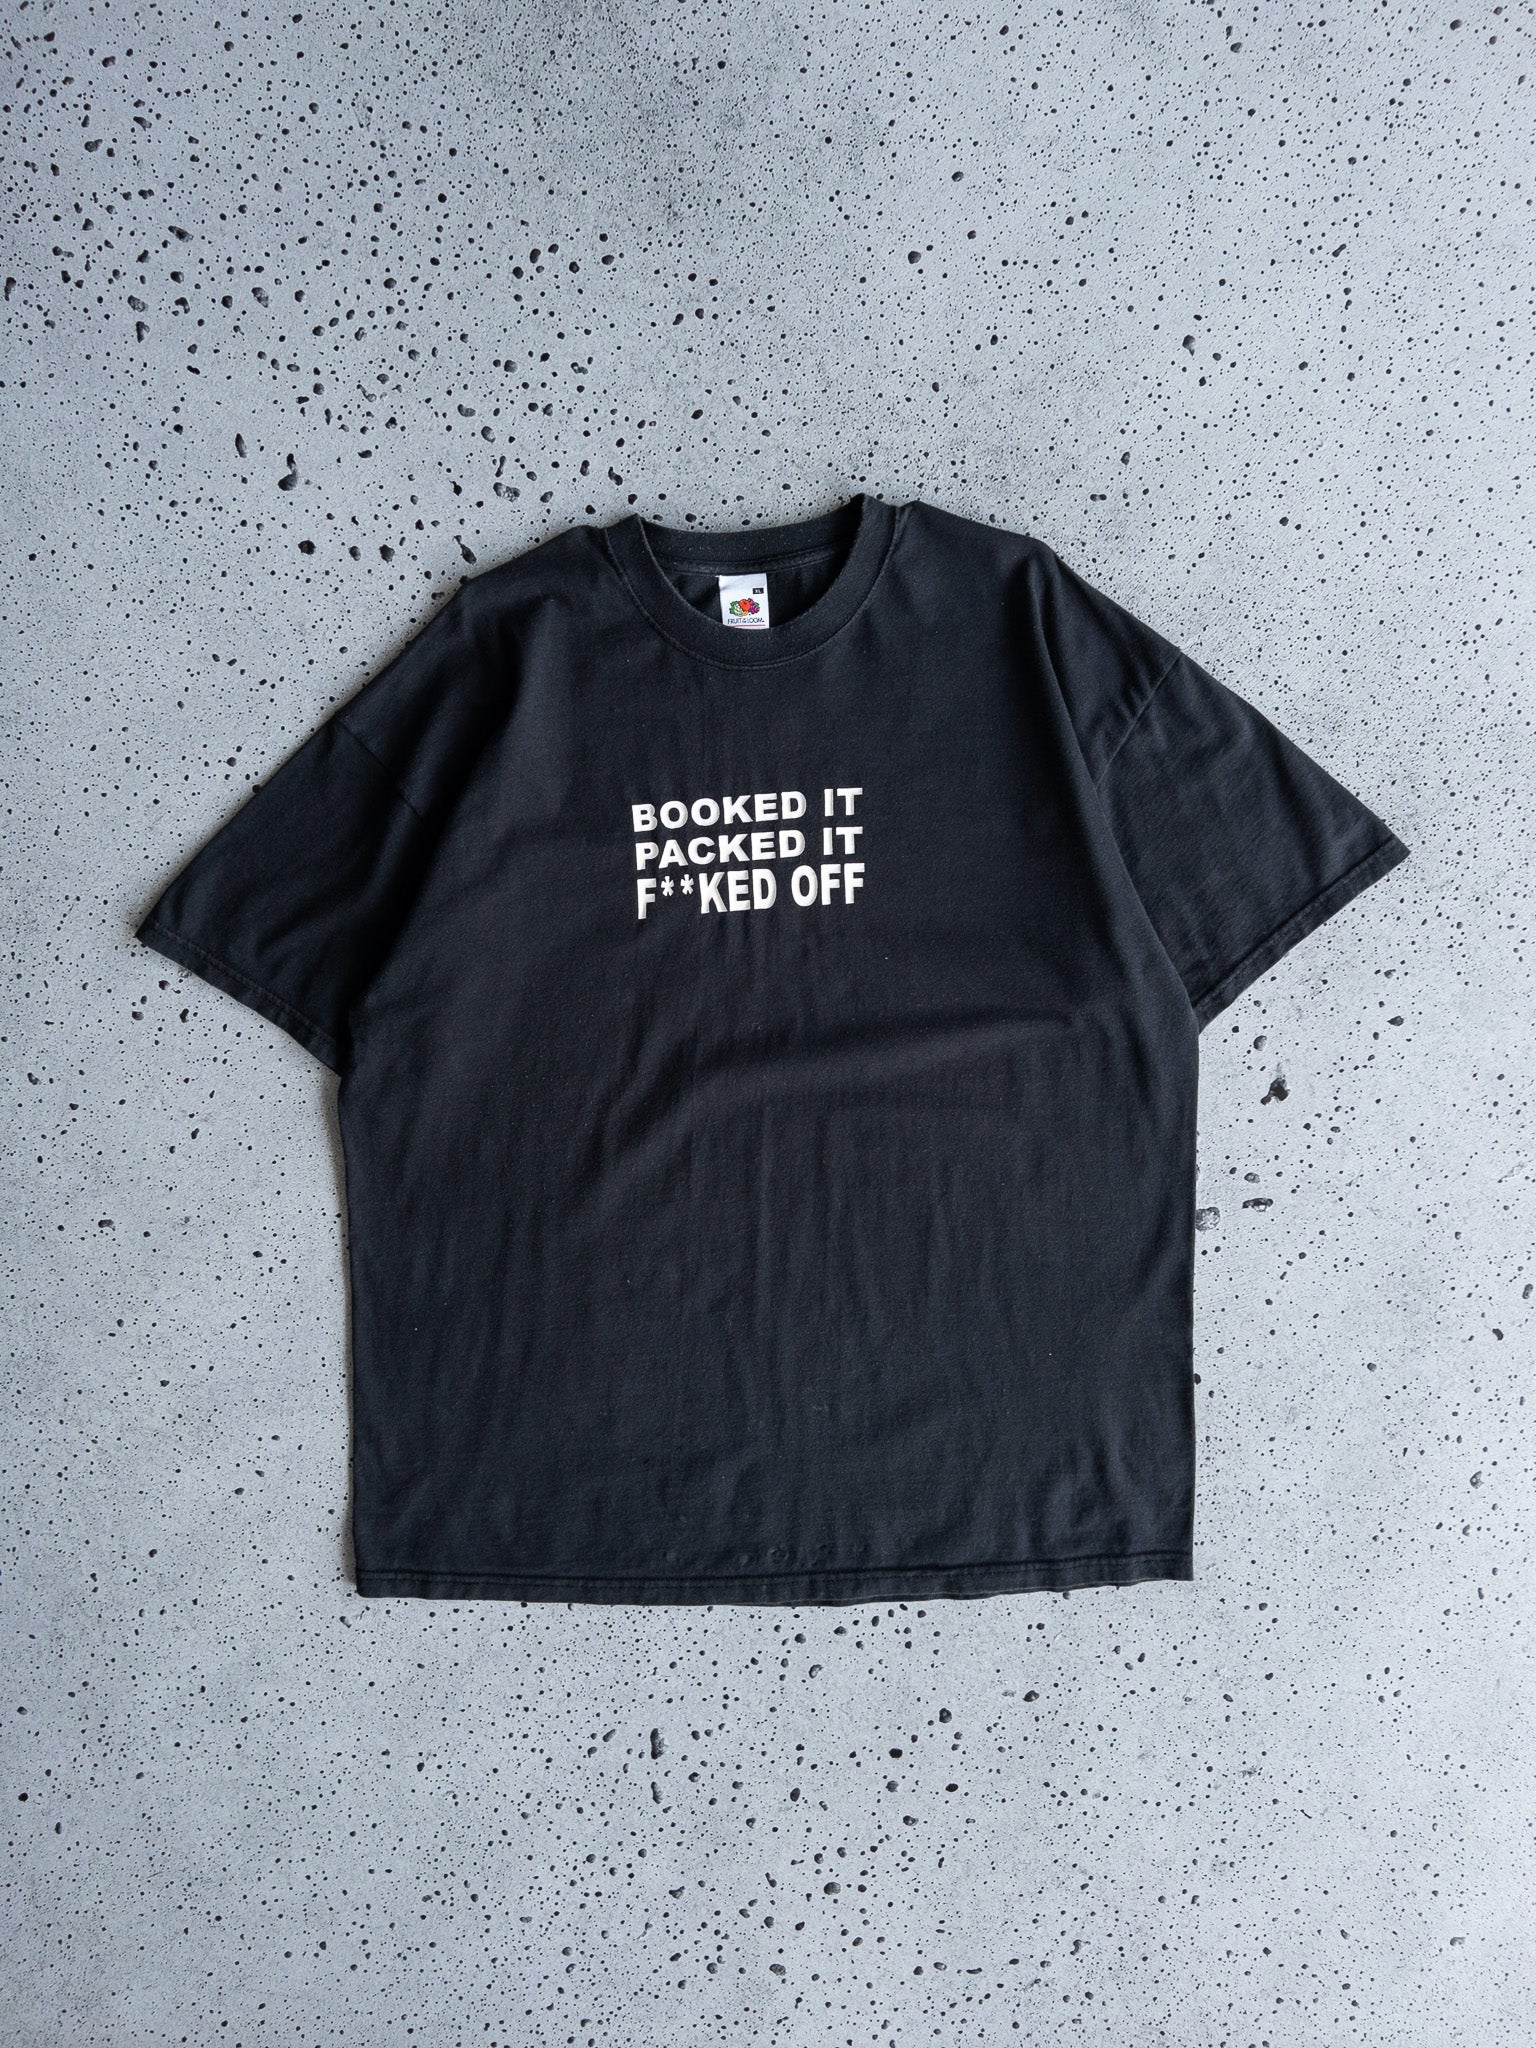 Vintage Booked It, Packed It, F**ked Off Tee (XL)